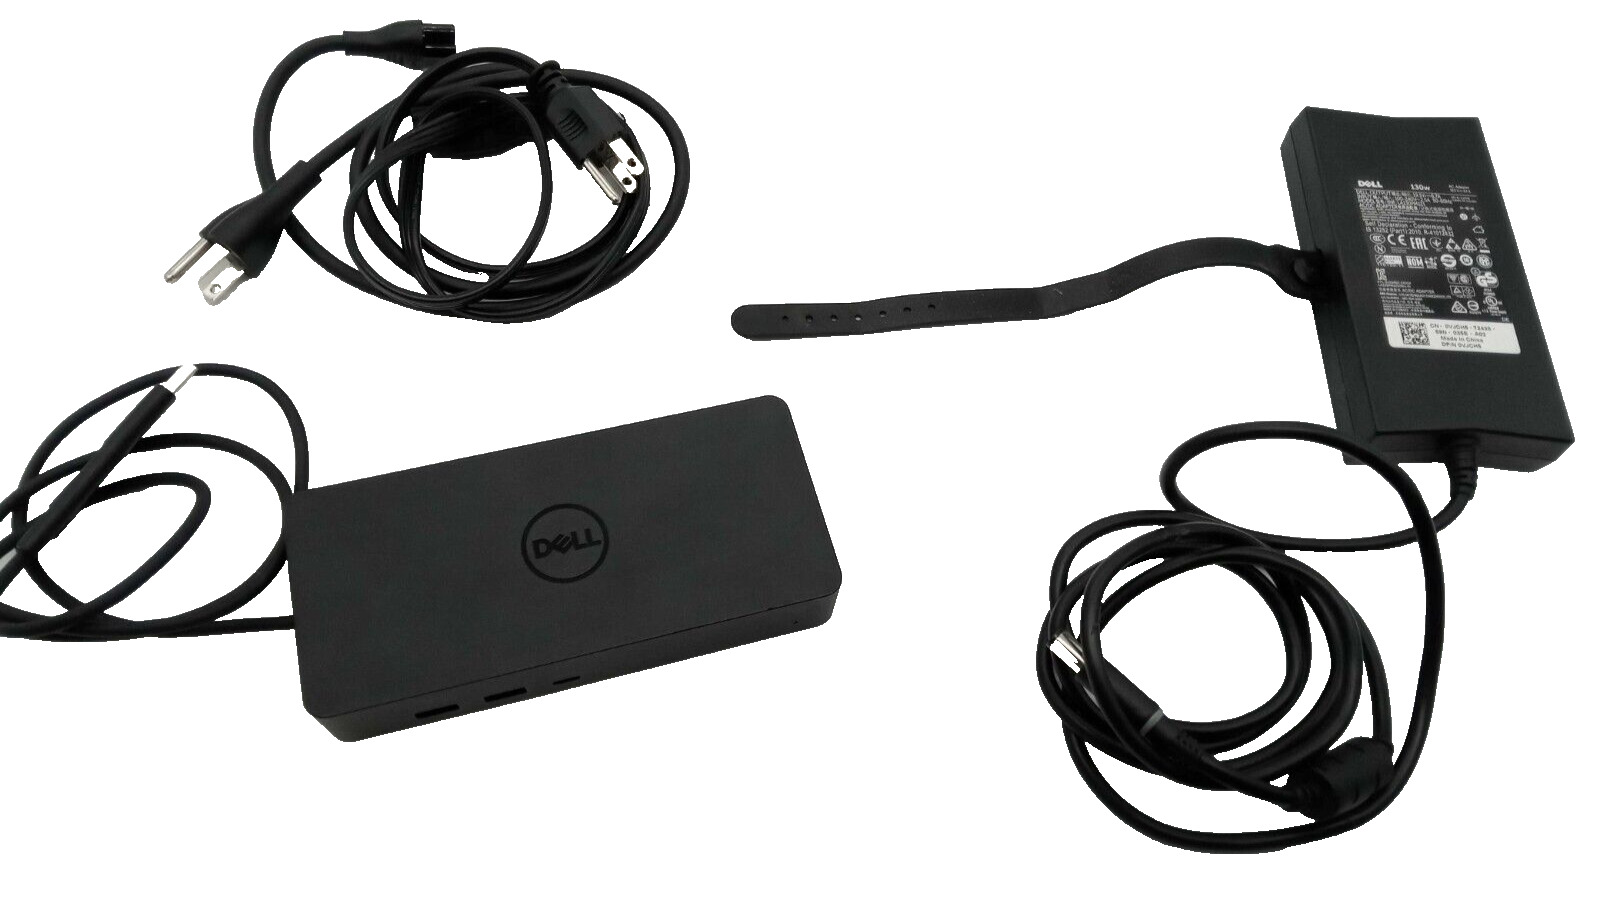 Dell D6000S Universal Docking Station USB 3.0 USB-C with 130 W Power Adapter